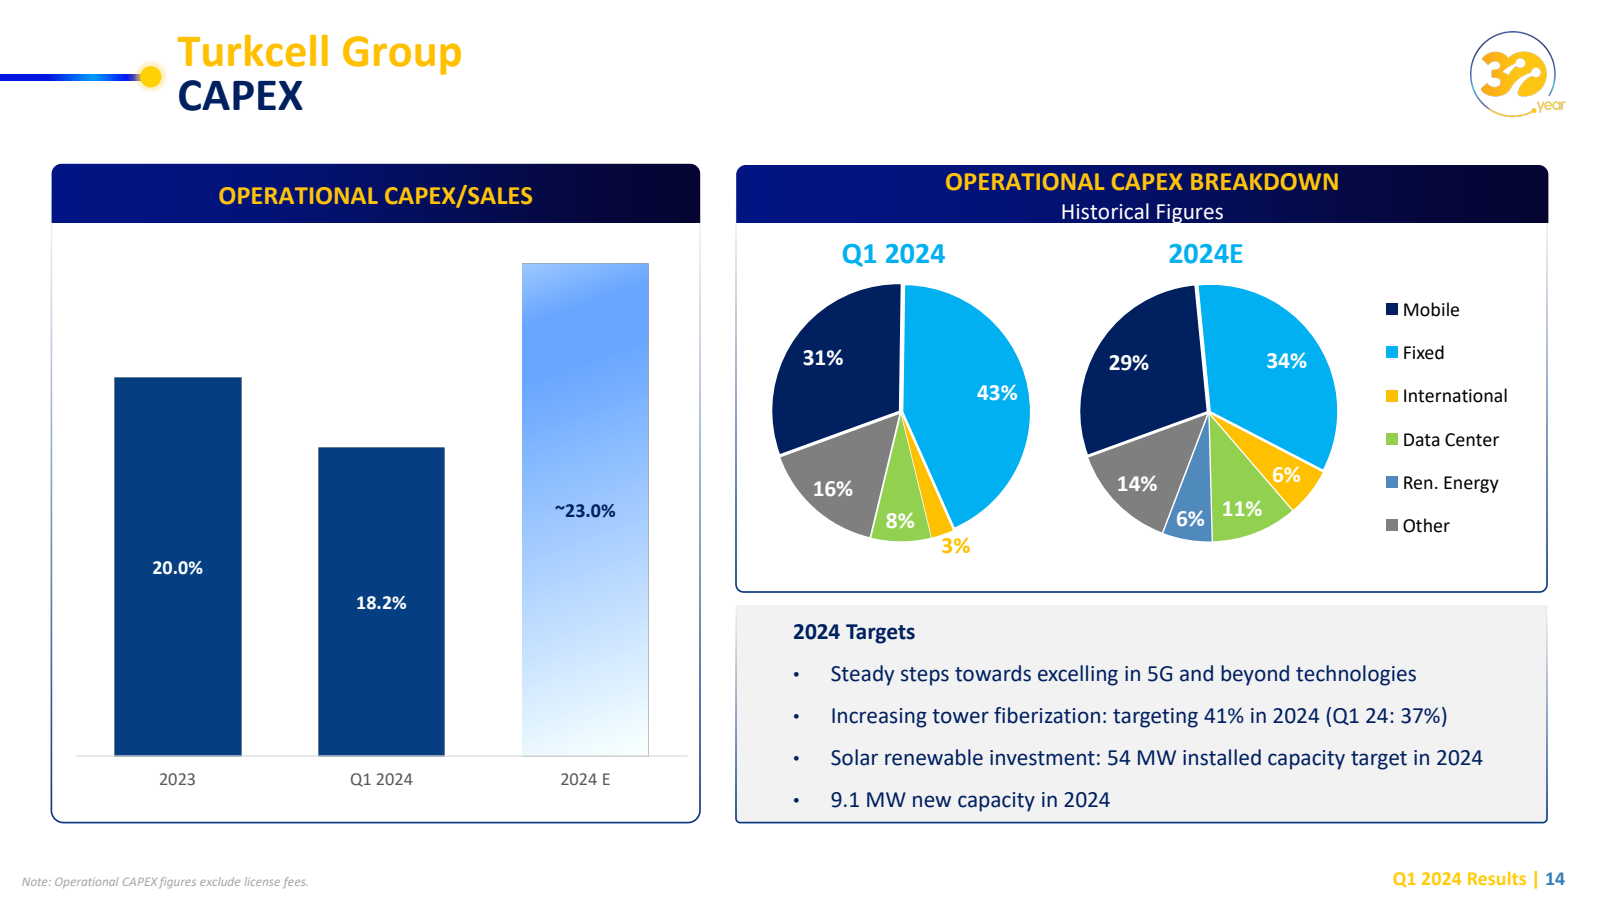 Turkcell Group CAPEX